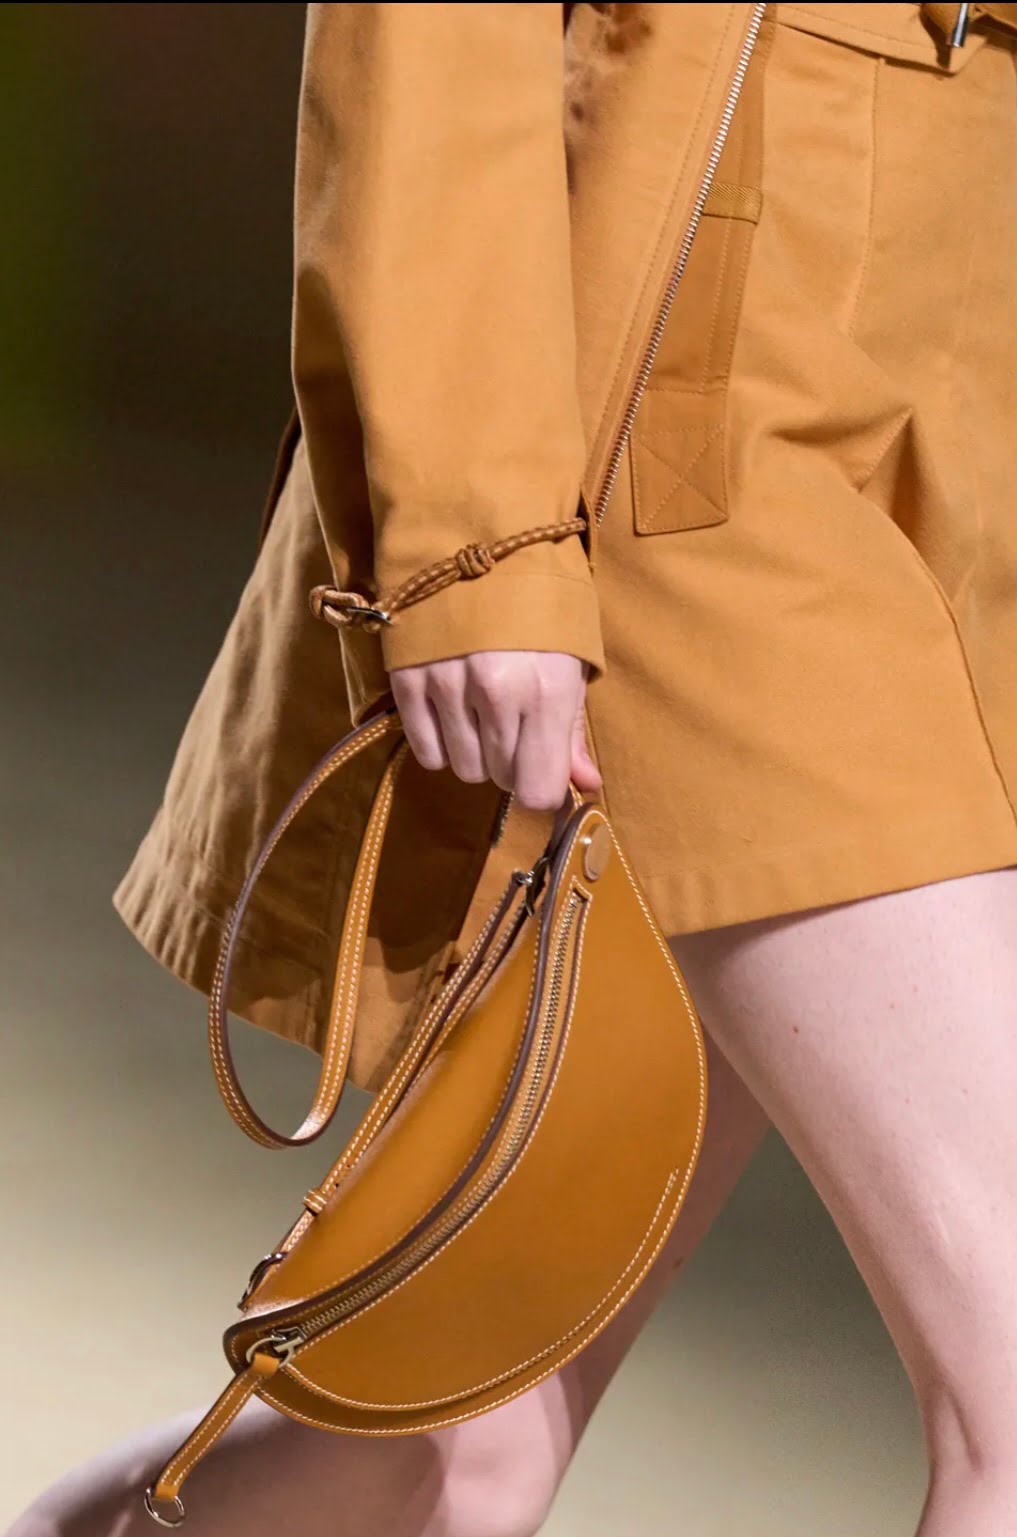 Hermès recently released a new bag and I am here for it. Meet the In-T